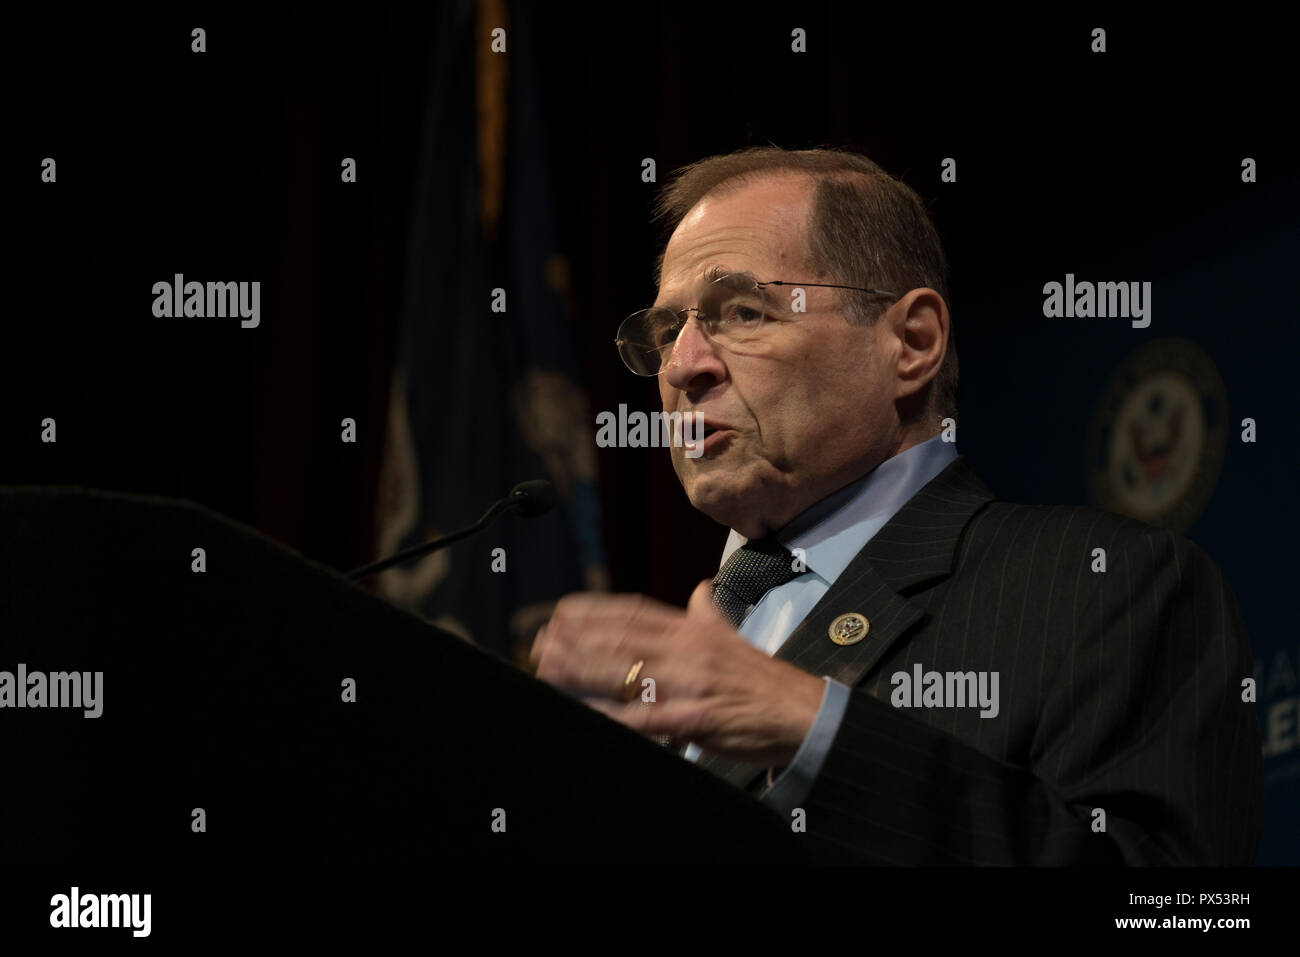 Congressman Jerrold Nadler (D-NY), who represents the 10th Congressional District, speaking at a Town Hall meeting in Manhattan on Oct. 9, 2018. Stock Photo